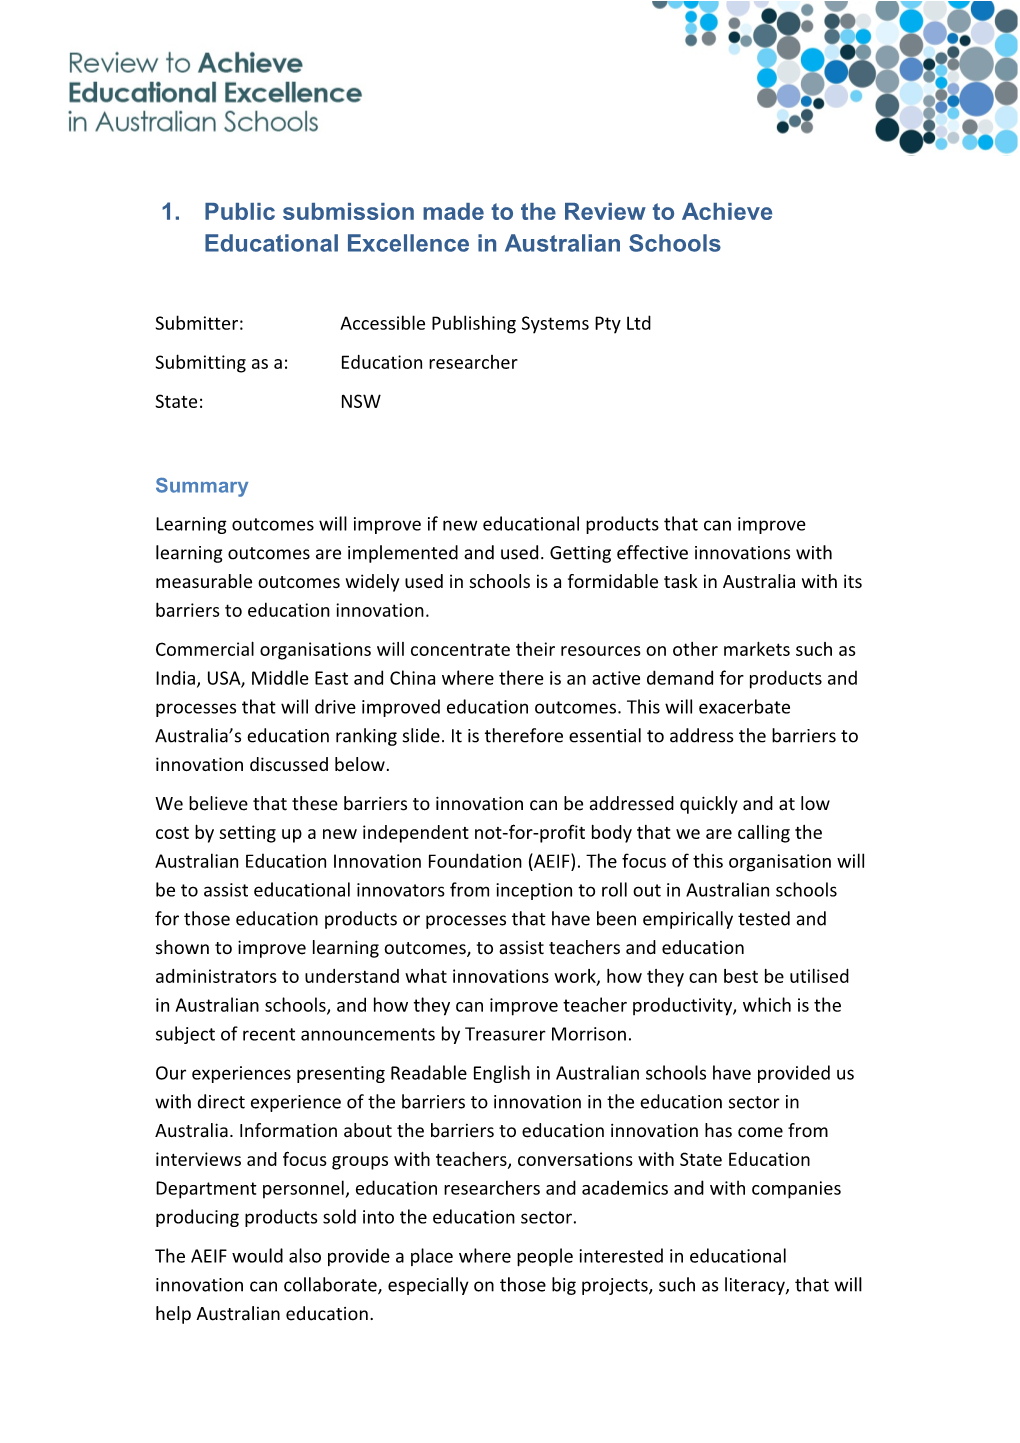 Public Submission Made to the Review to Achieve Educational Excellence in Australian Schools